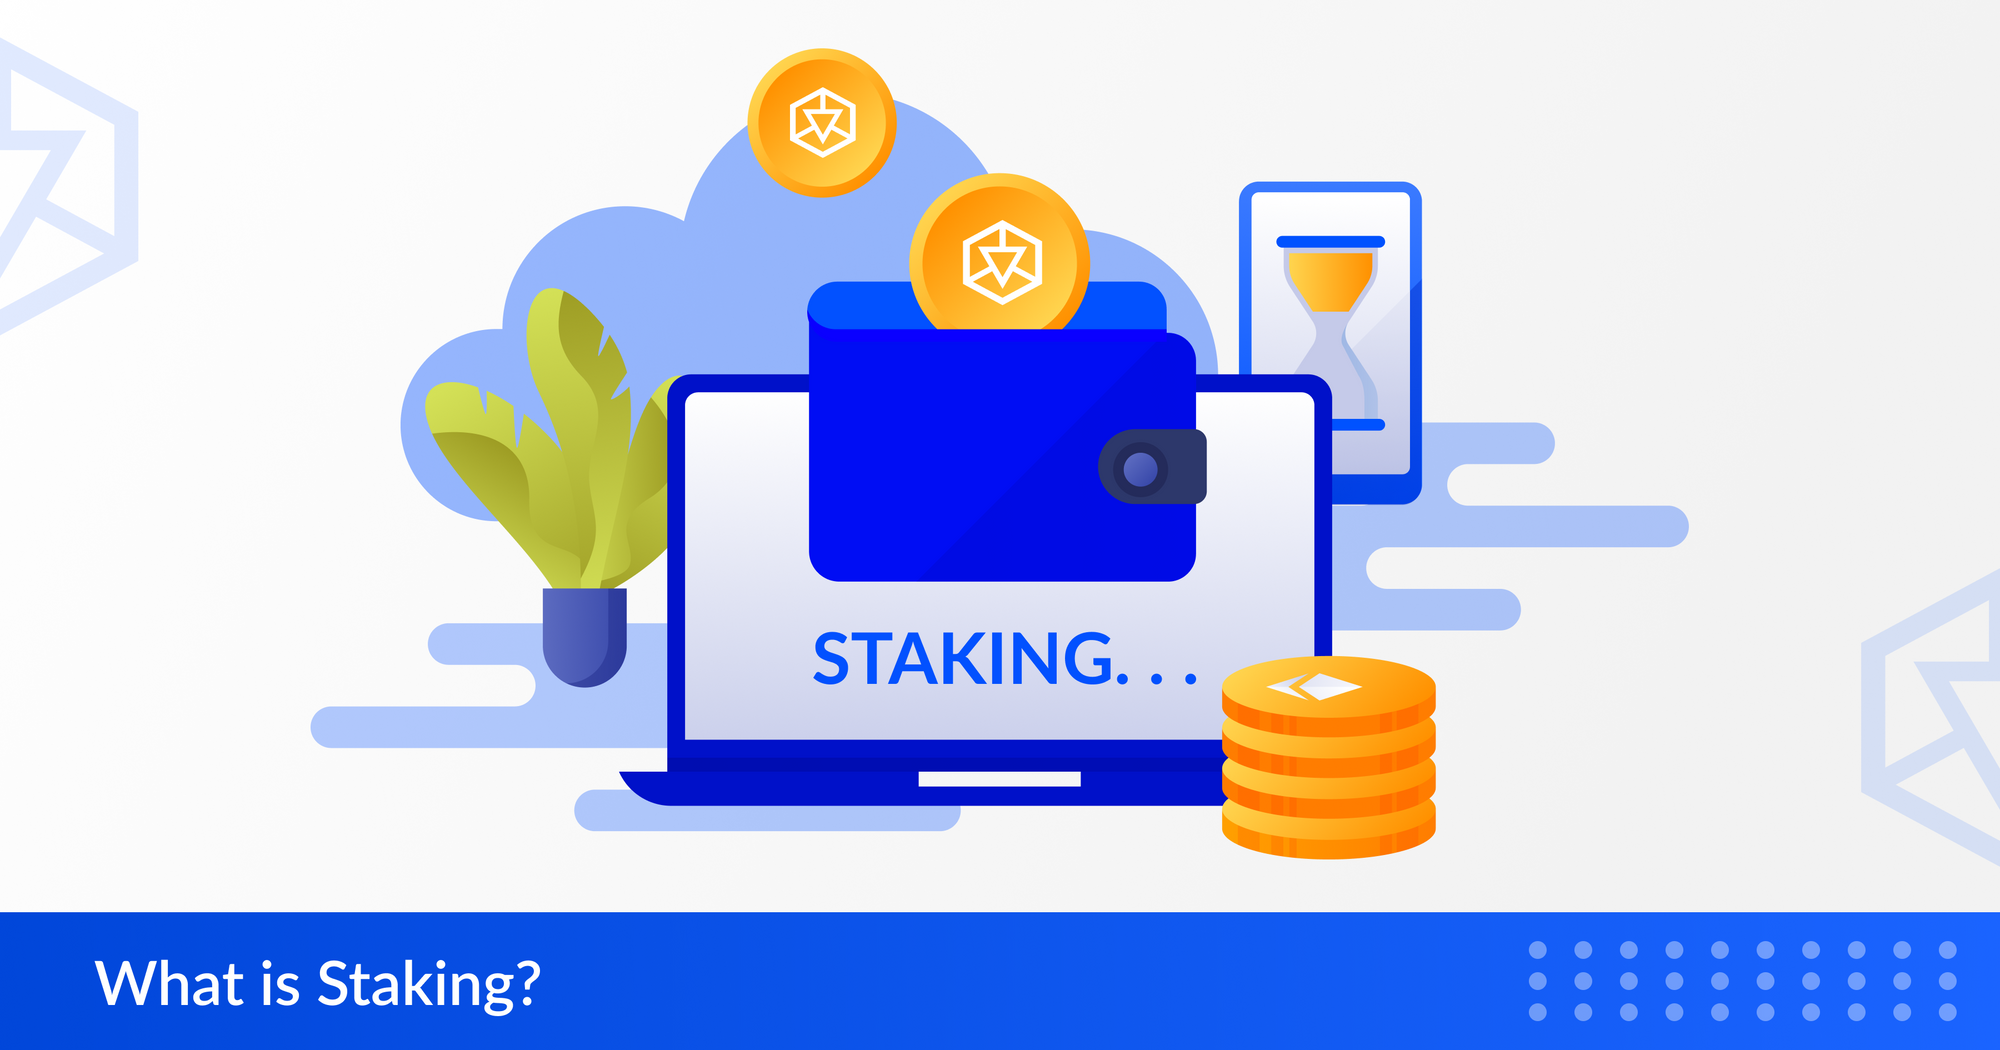 What is Staking all about?